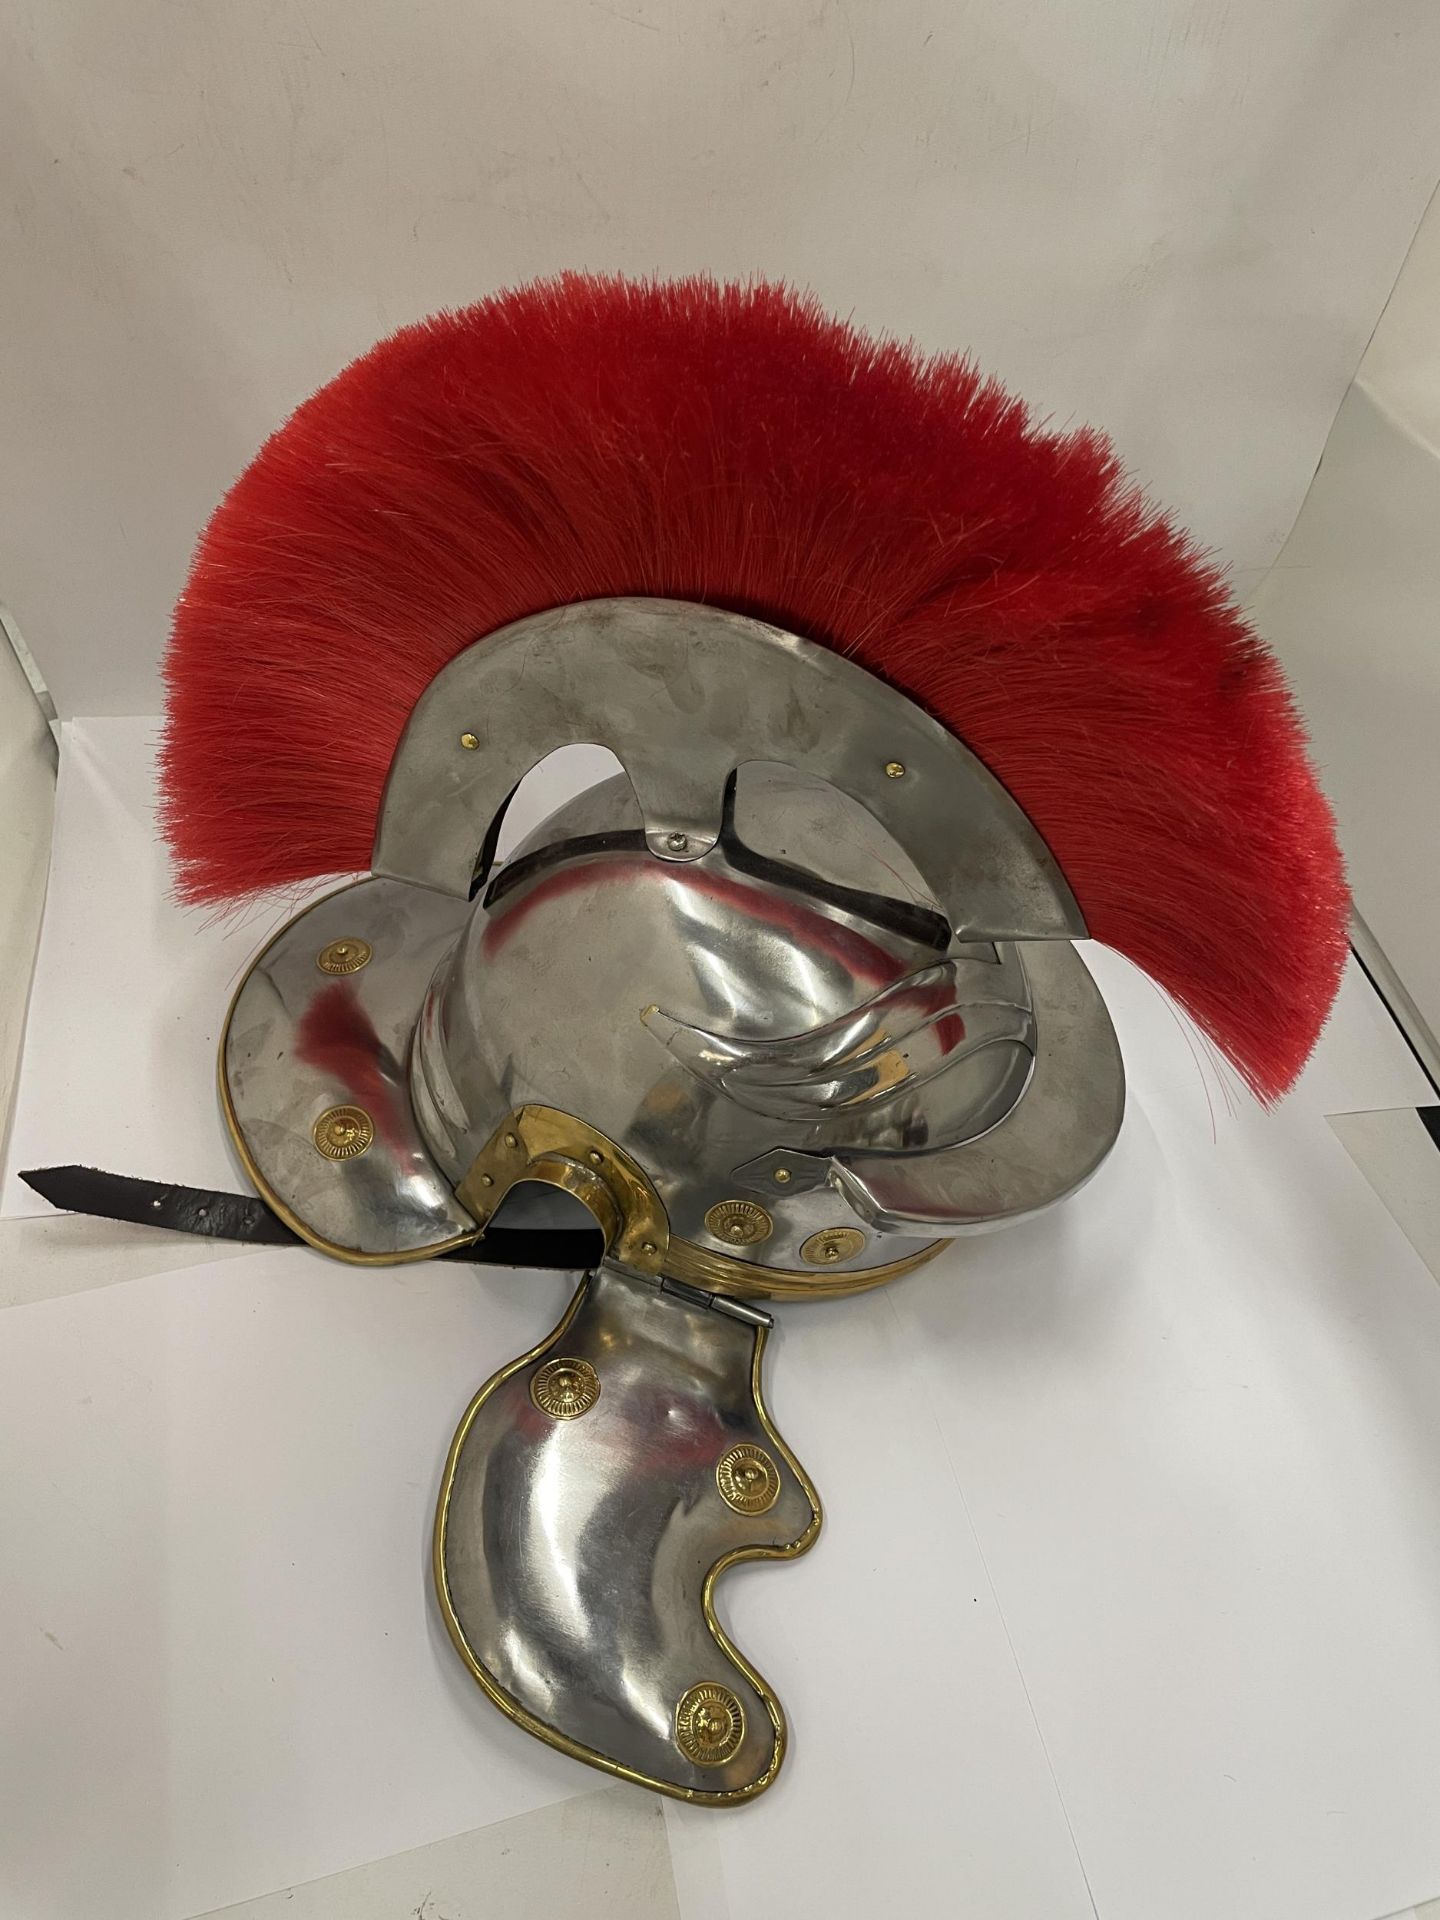 A ROMAN STYLE GLADIATOR HELMET WITH RED PLUME - Image 3 of 4